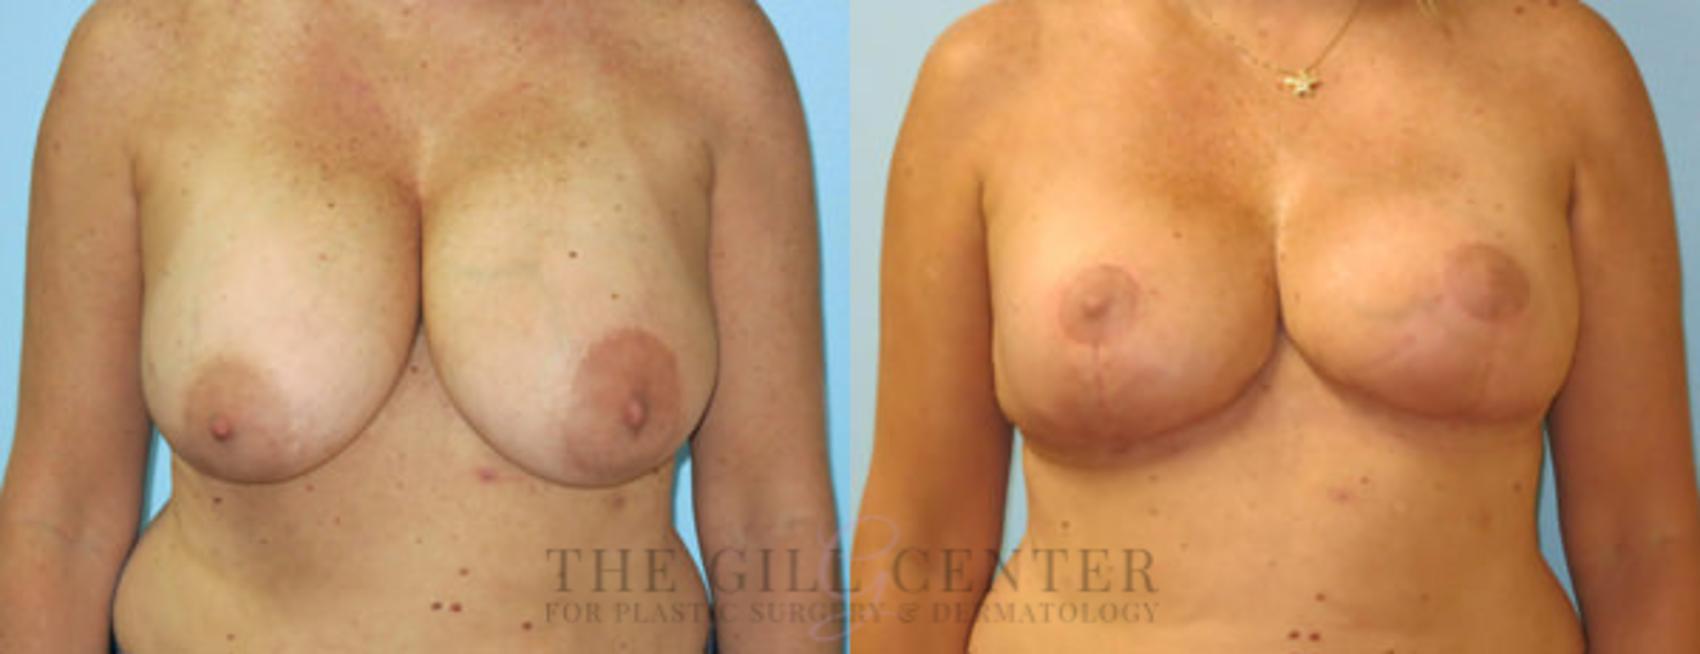 Breast Revisions Case 389 Before & After Front | The Woodlands, TX | The Gill Center for Plastic Surgery and Dermatology